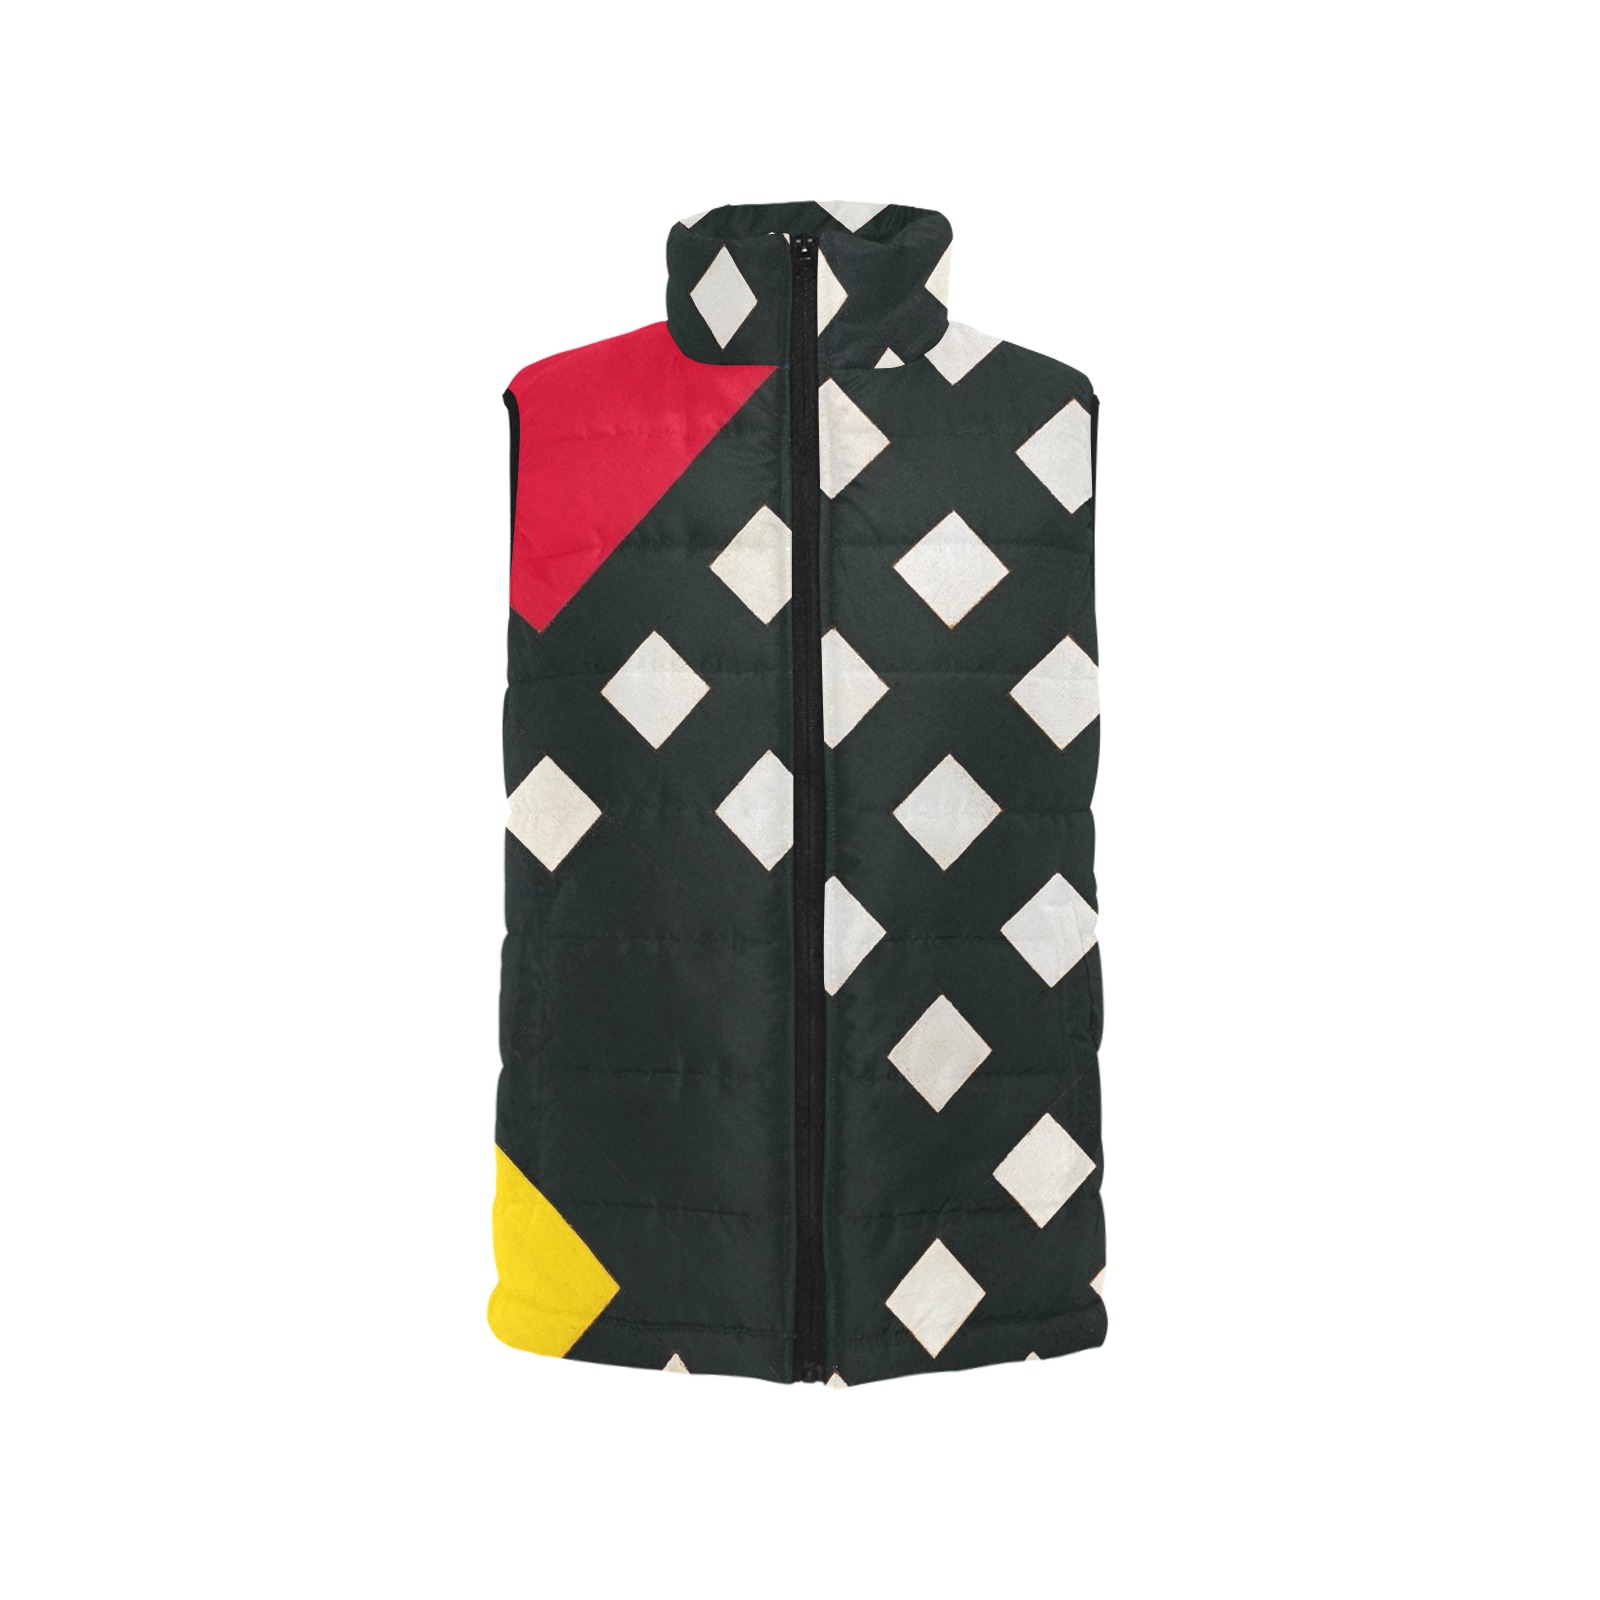 Counter-composition XV by Theo van Doesburg- Women's Padded Vest Jacket (Model H44)